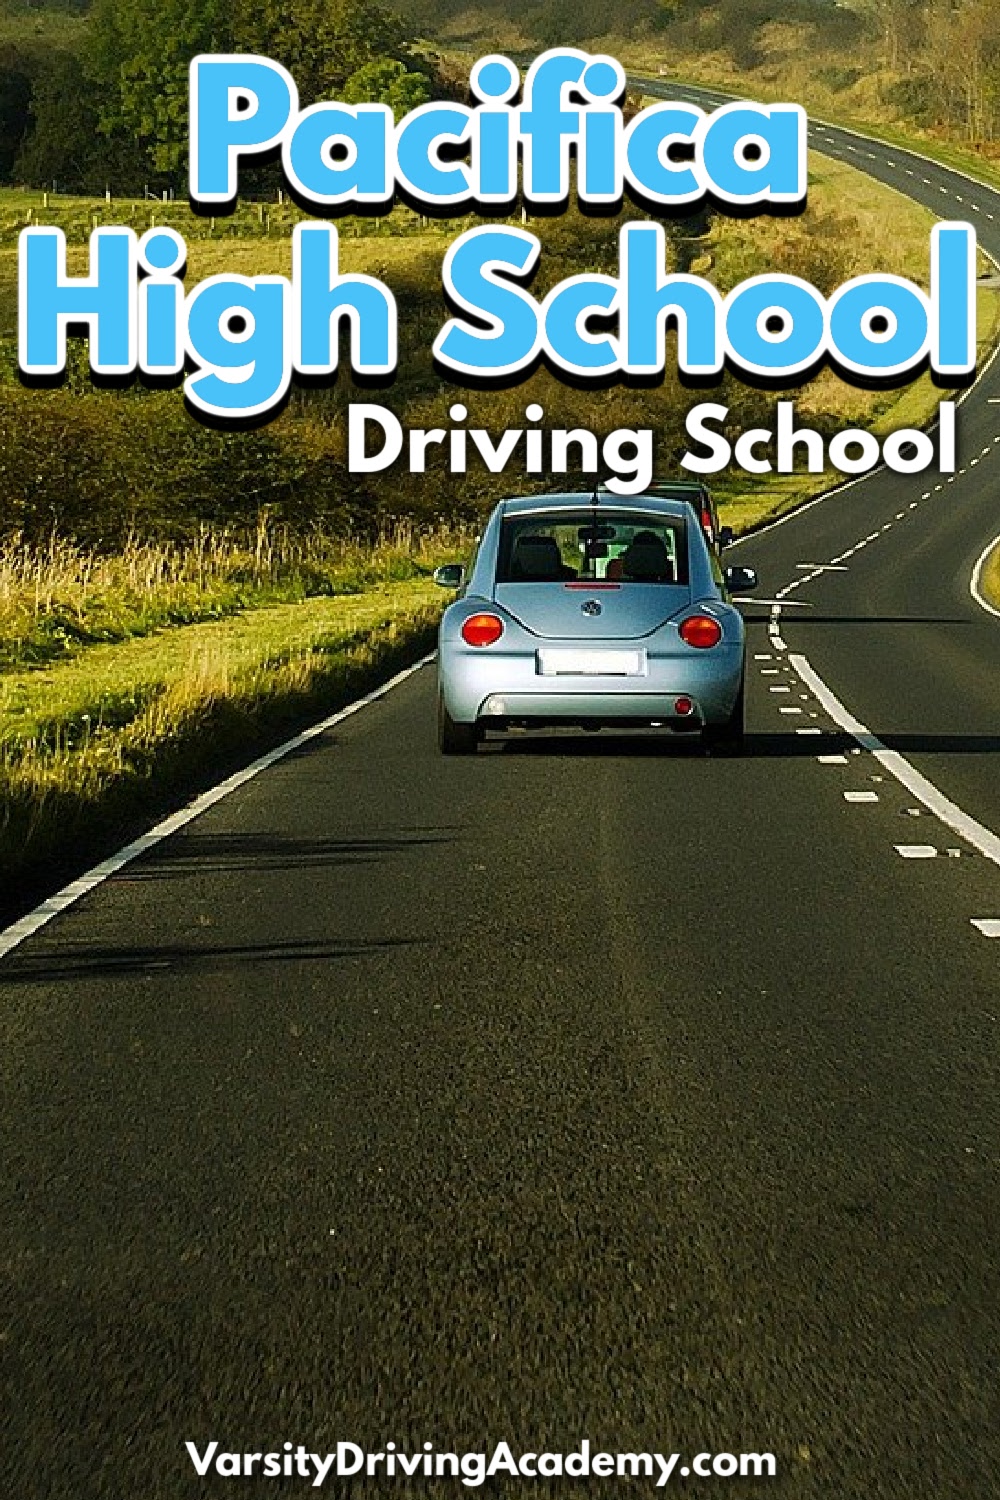 Varsity Driving Academy is the best Pacifica High School driving school thanks to the many services students can take advantage of.